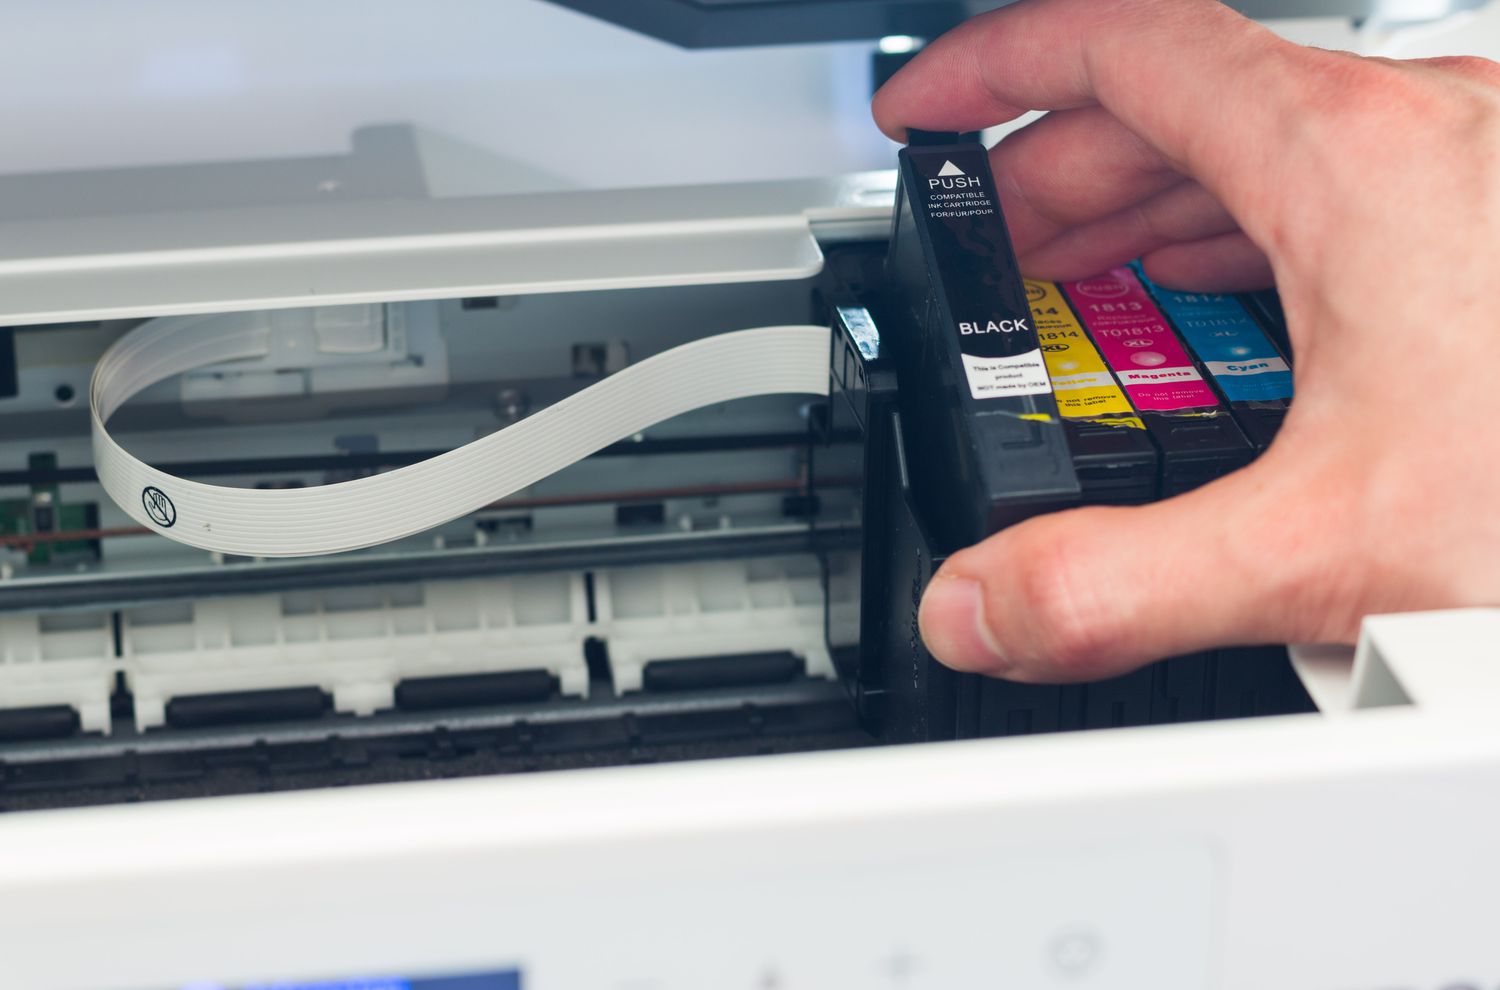 how to put ink in a hp printer